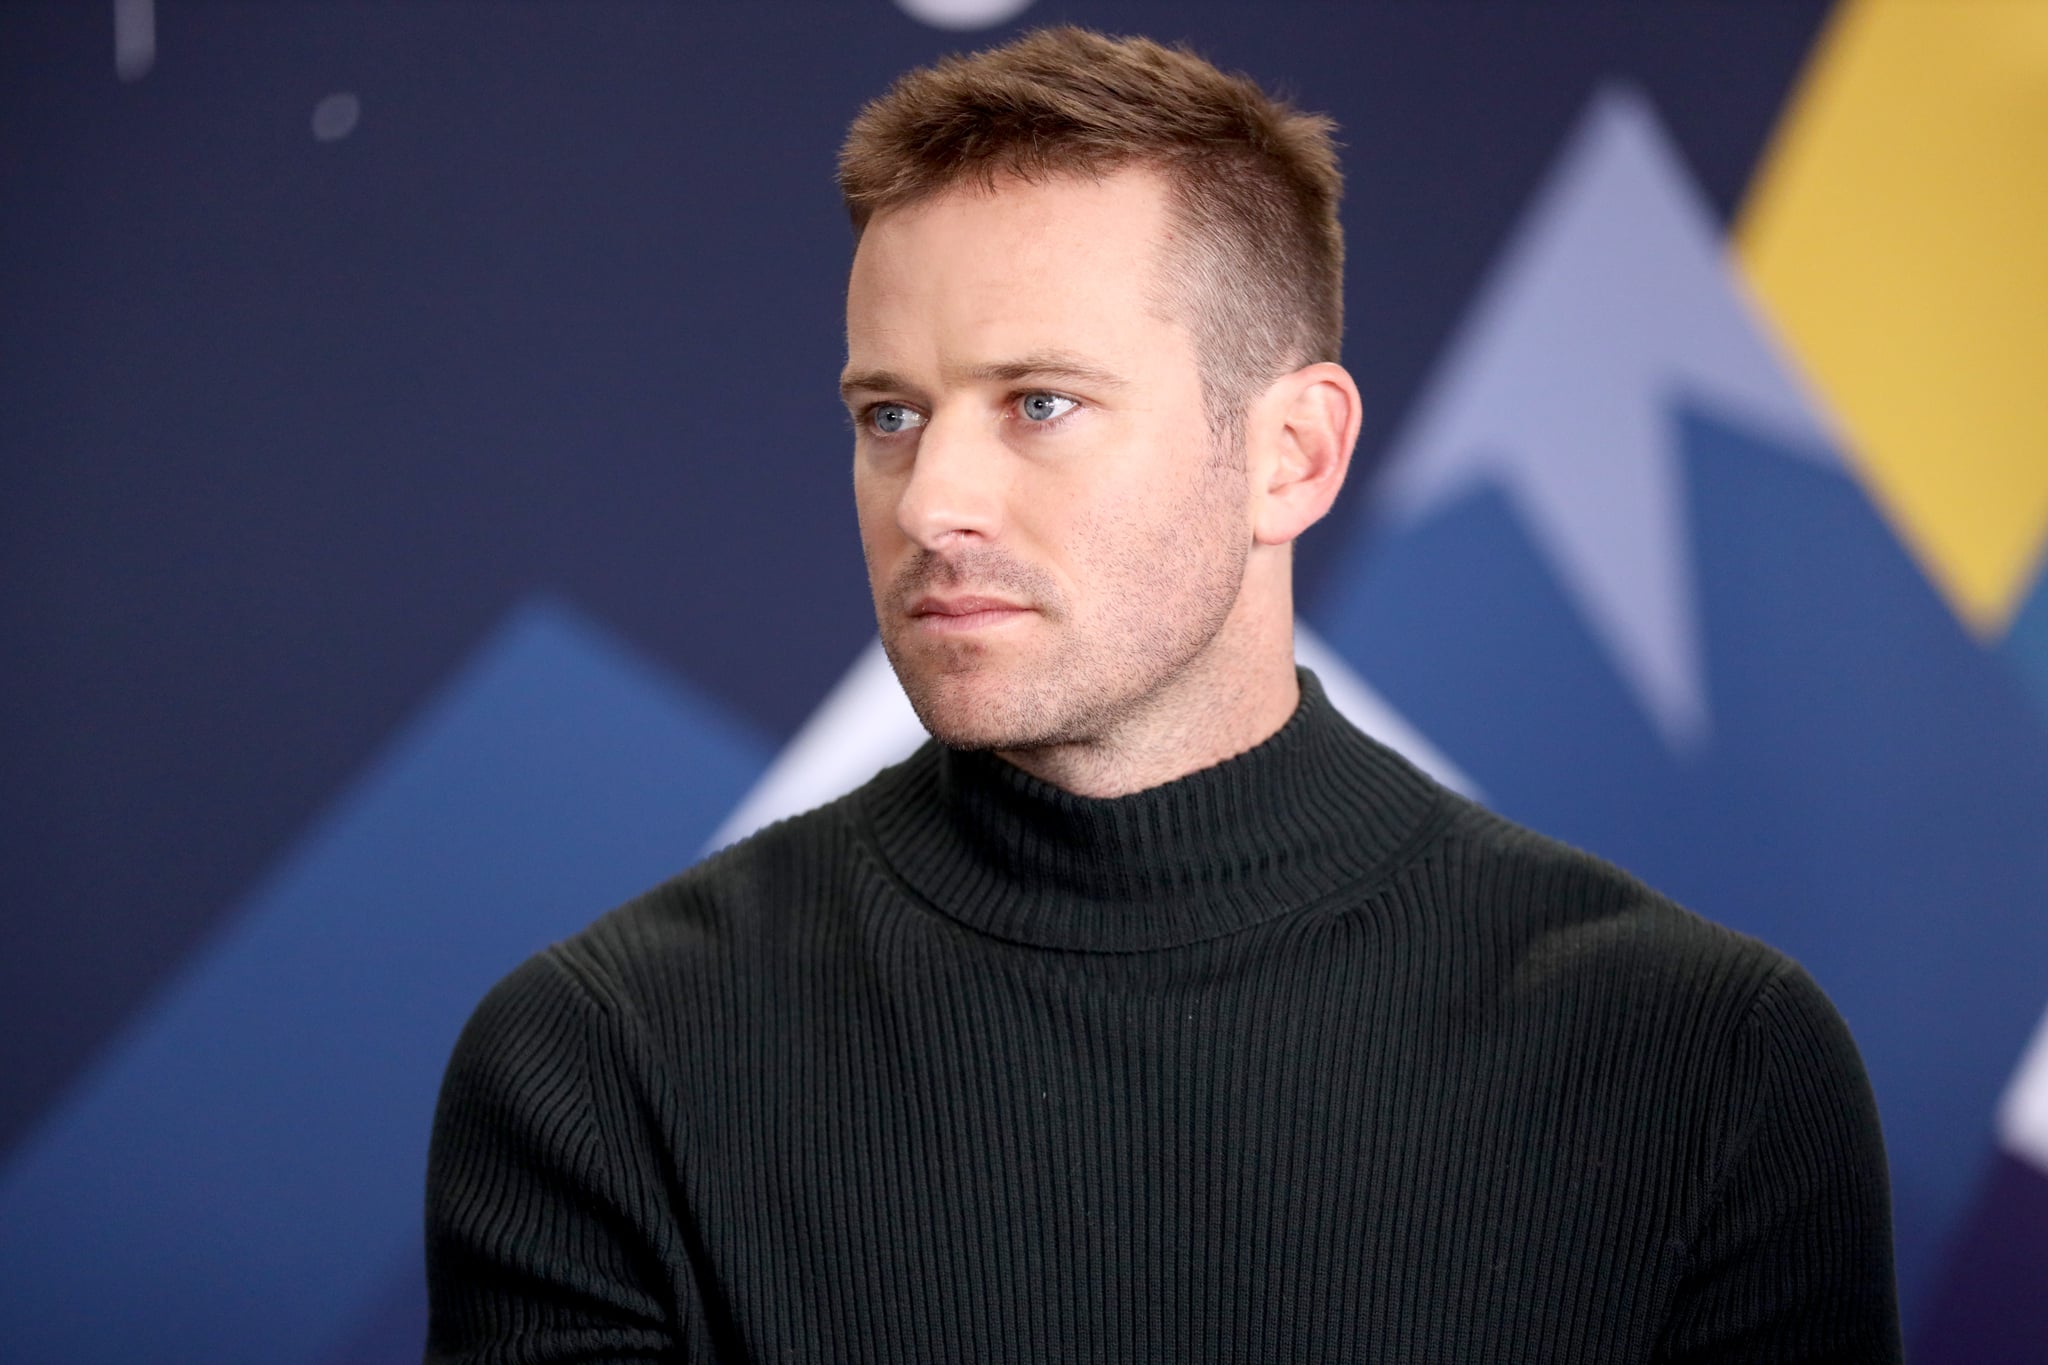 PARK CITY, UT - JANUARY 26:  Armie Hammer of 'Wounds' attends The IMDb Studio at Acura Festival Village on location at The 2019 Sundance Film Festival - Day 2  on January 26, 2019 in Park City, Utah.  (Photo by Rich Polk/Getty Images for IMDb)